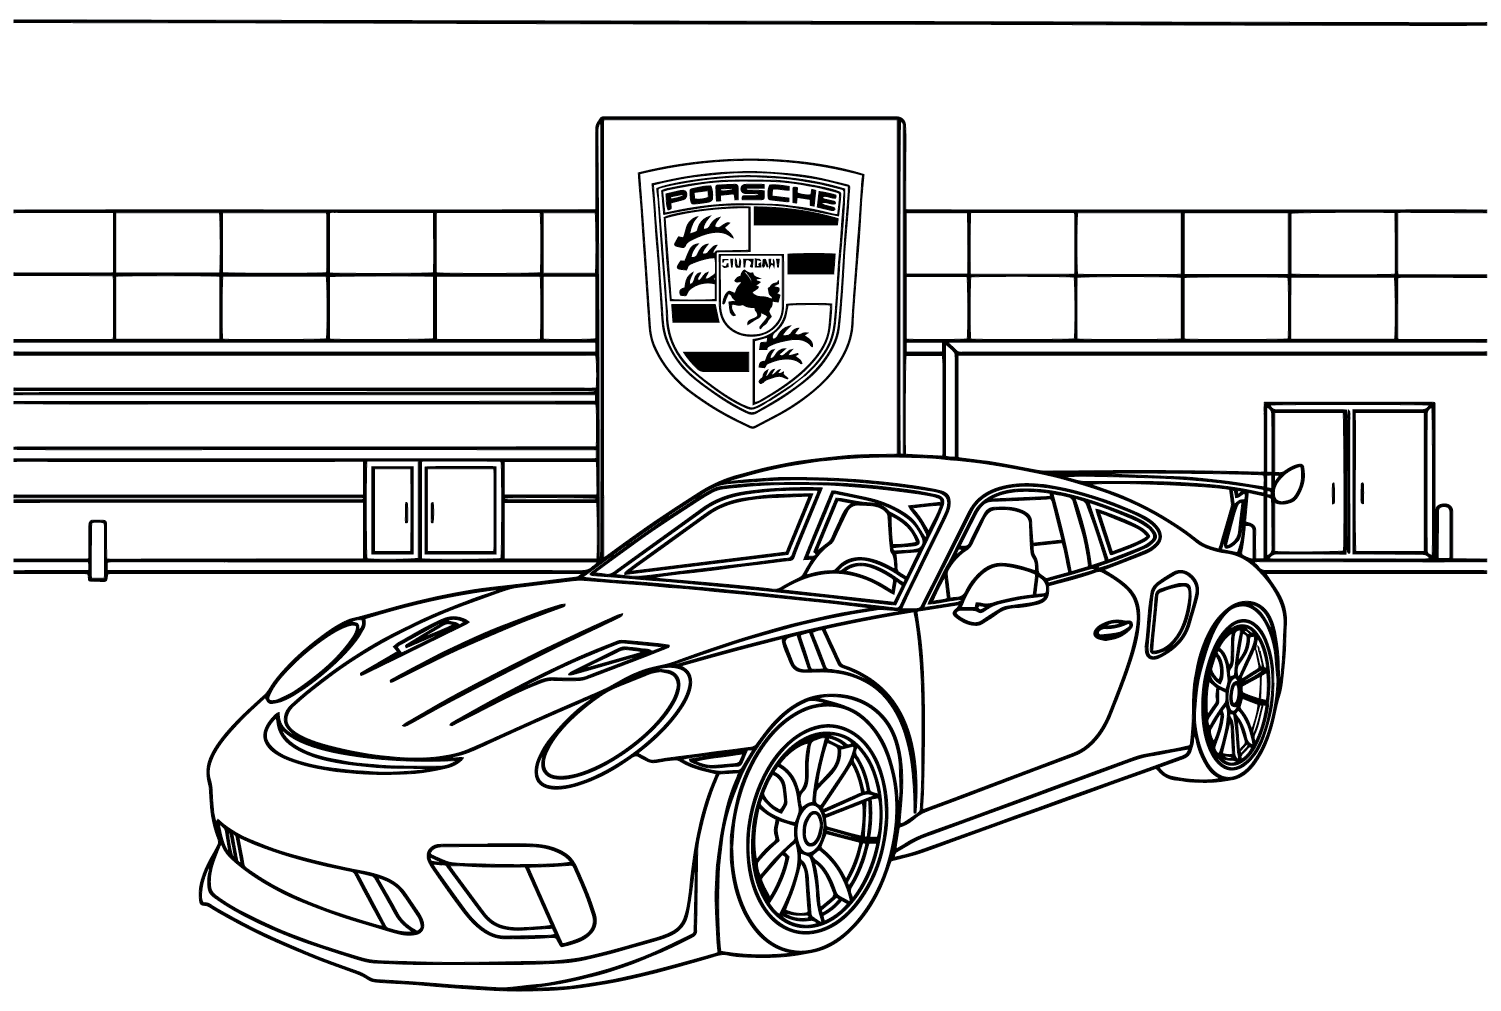 Porsche Coloring Pages to Download from Porsche